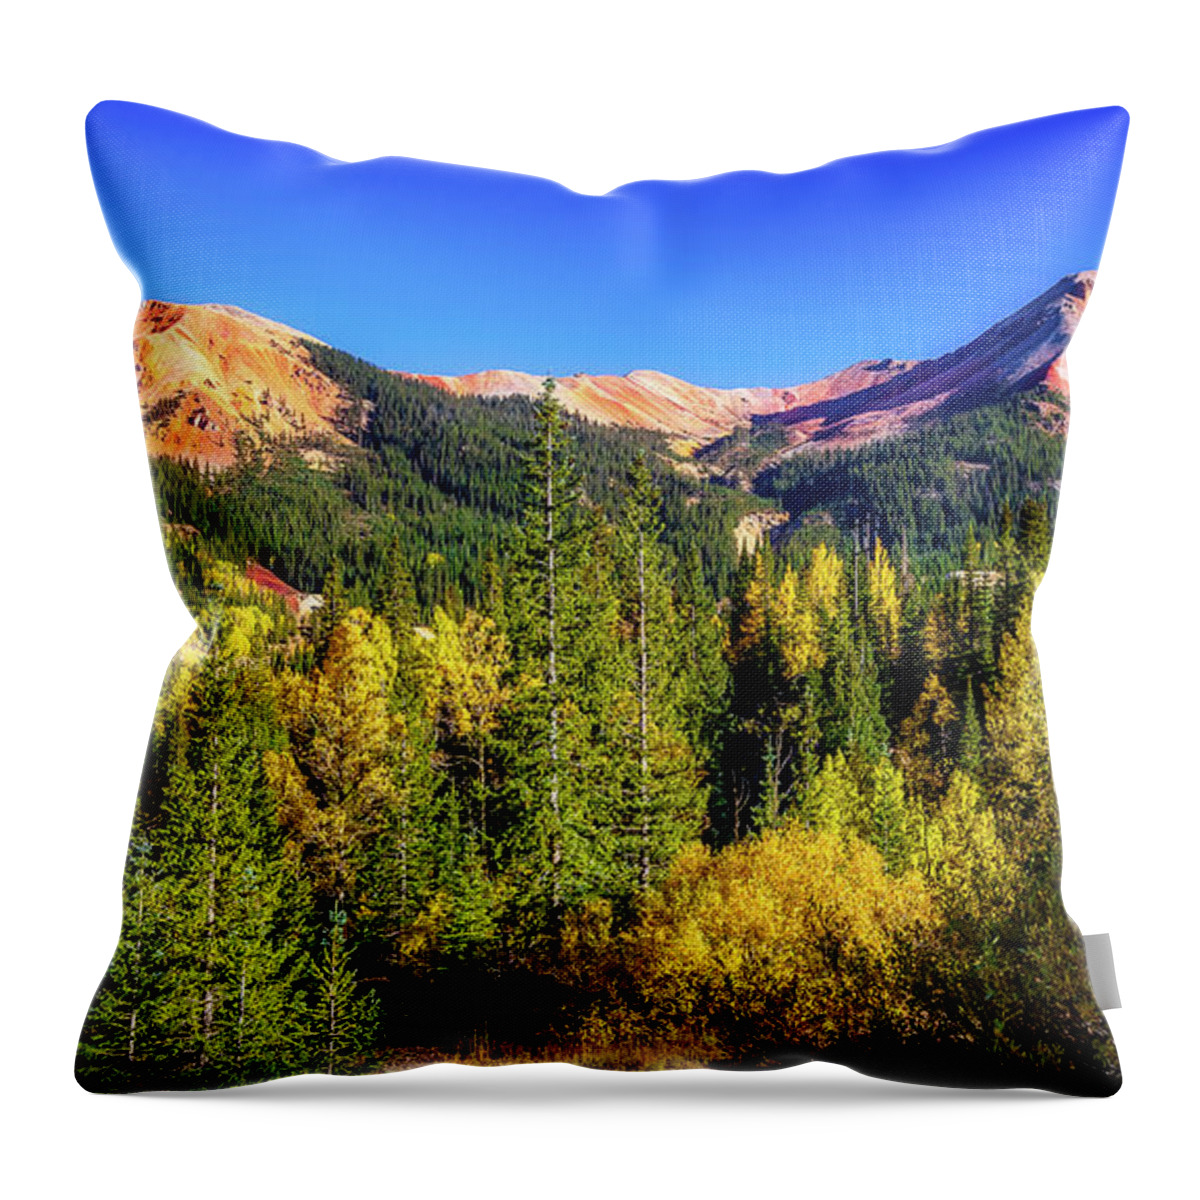 Mountains Throw Pillow featuring the photograph Million Dollar Panorama by Bradley Morris